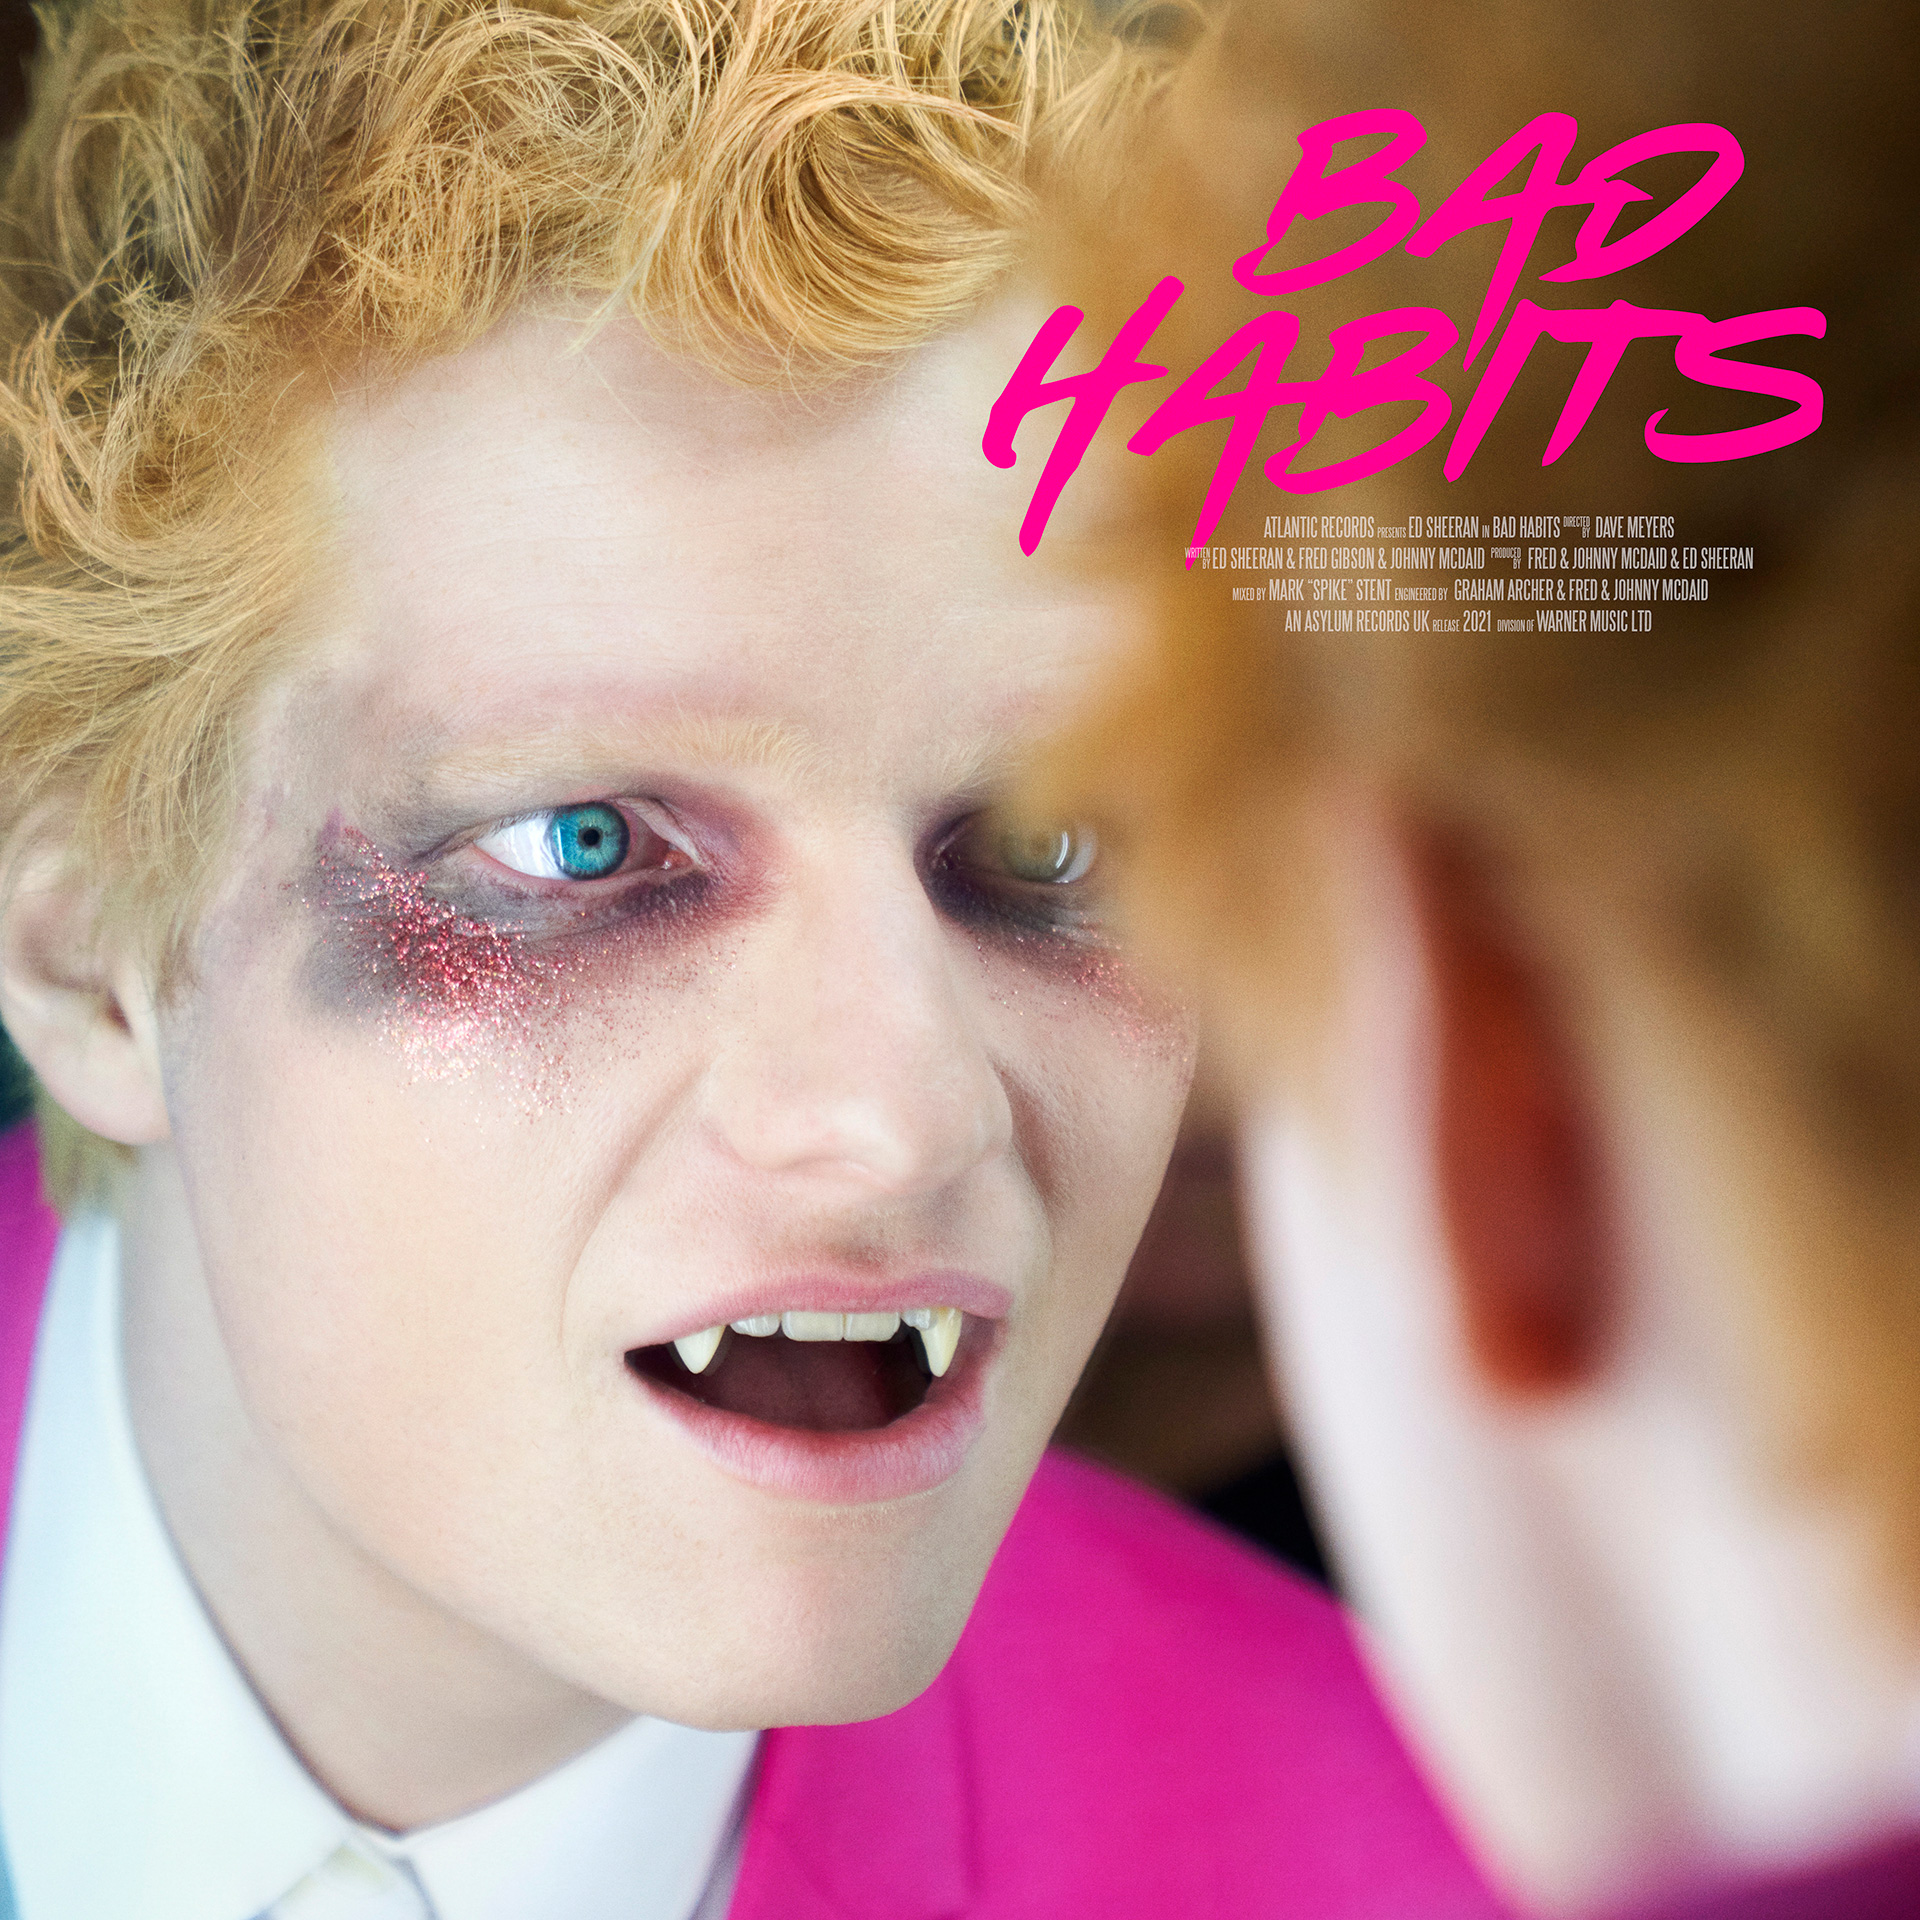 Ed to release new single Bad Habits on June 25th